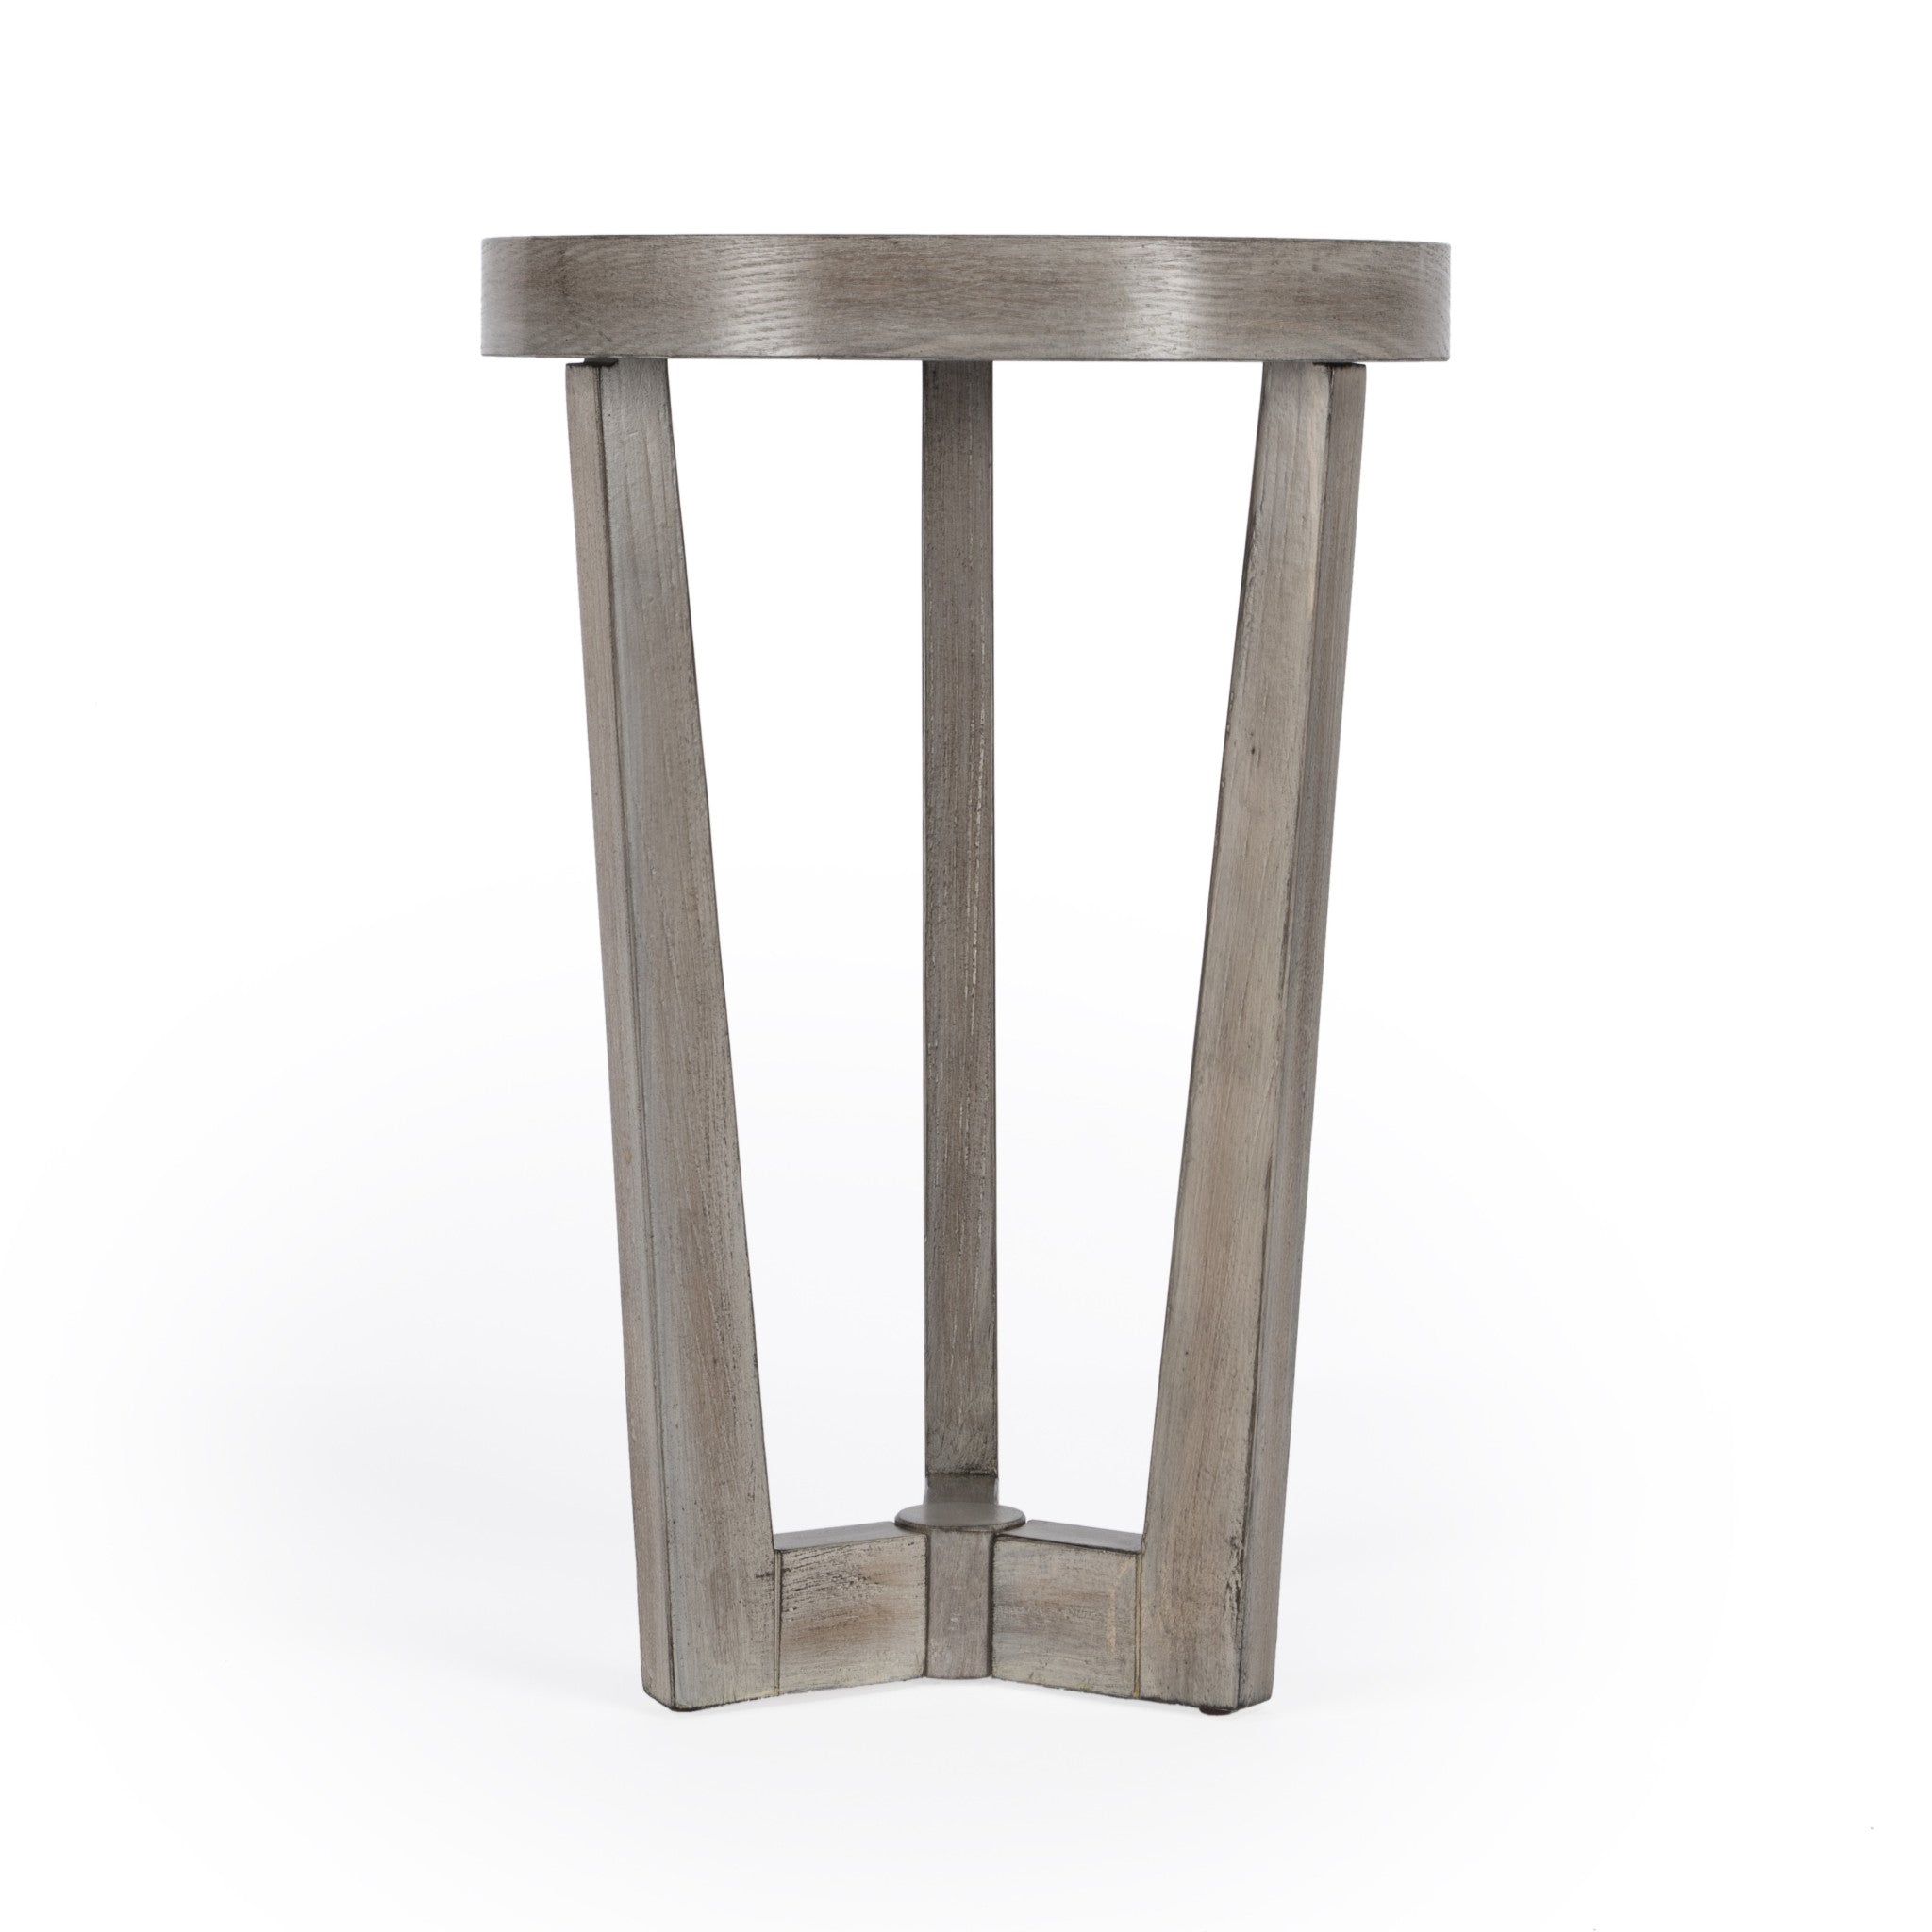 24" Gray Manufactured Wood Round End Table